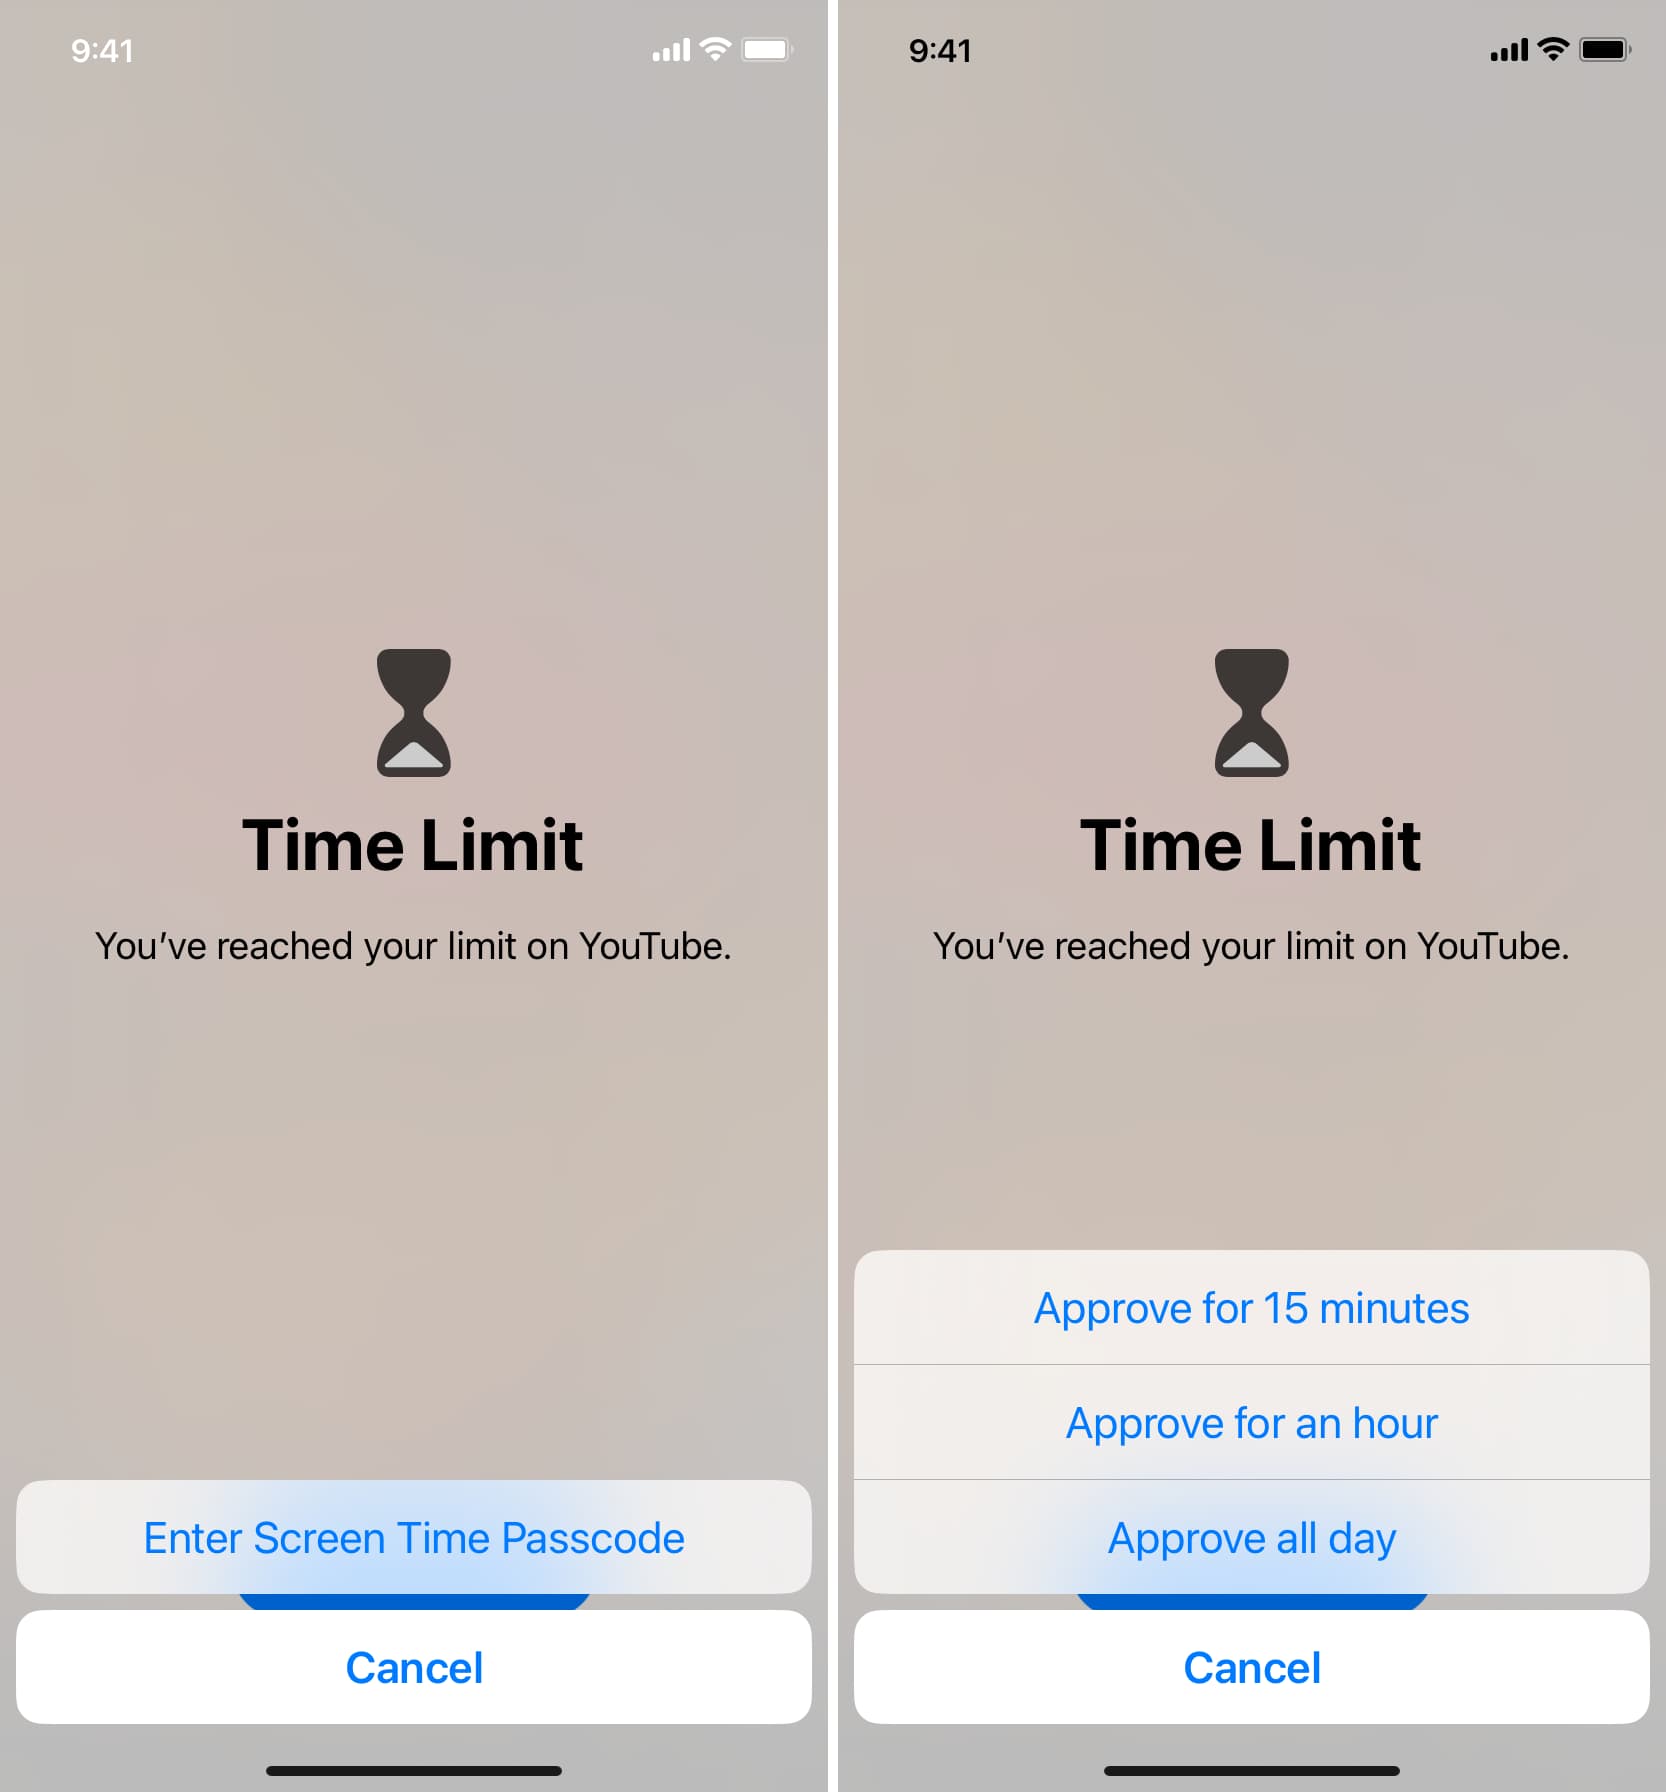 Approve app for 15 more minutes, one hour, or all day on iPhone